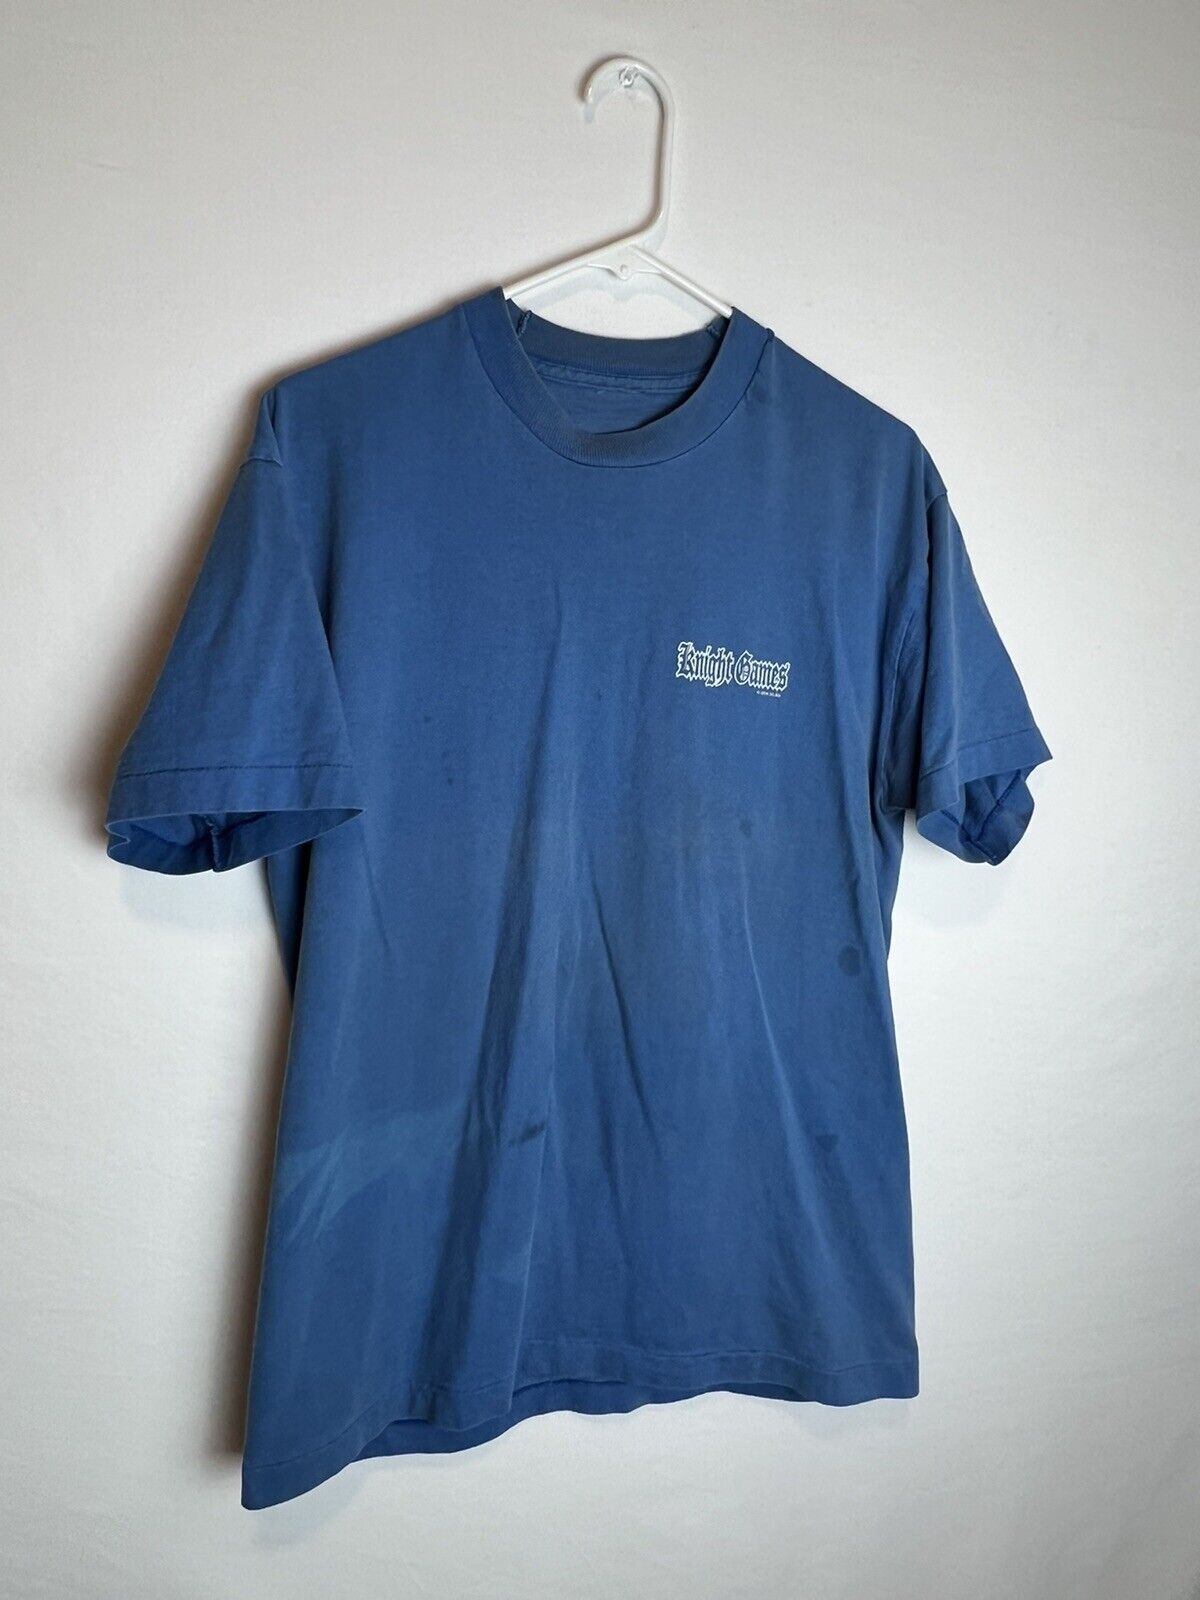 Other XLR8 Knight Games 1996 Blue Mullet Vintage T-Shirt | Grailed